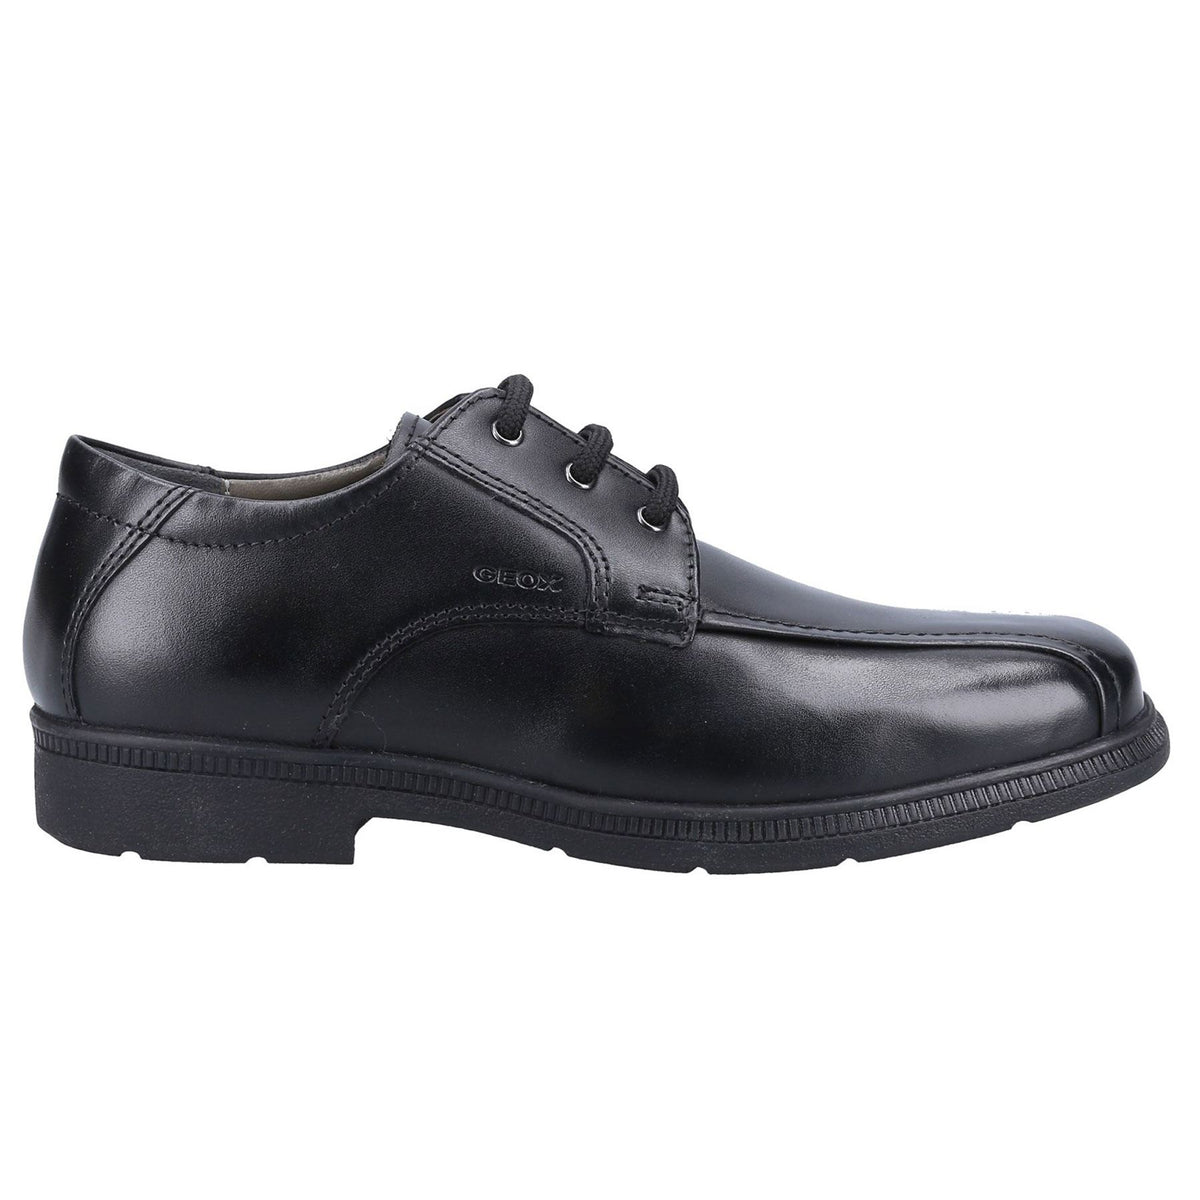 Geox Boys School Touch Fastening J Federico H Shoes